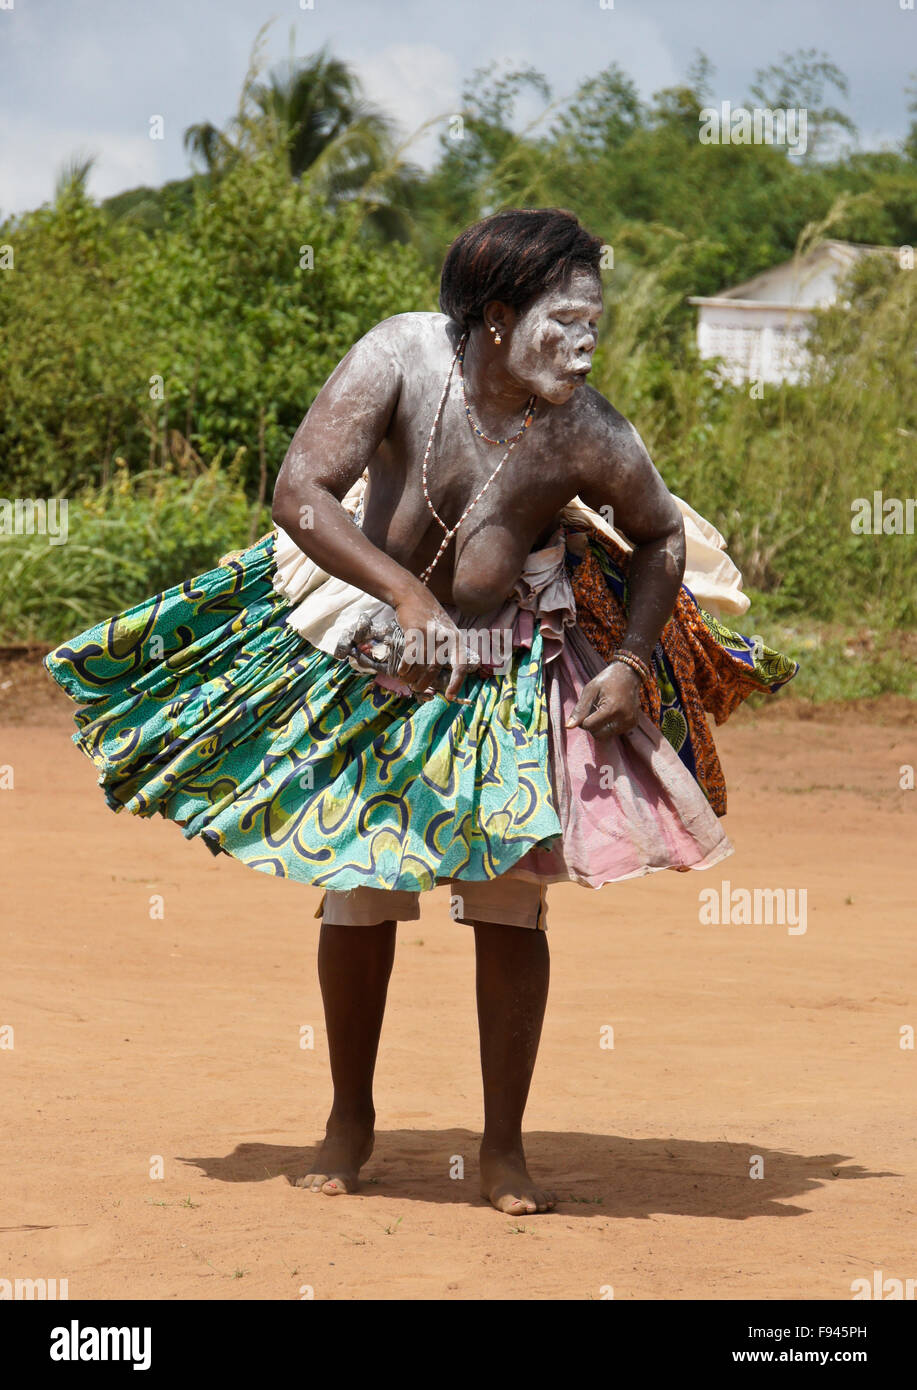 Vodun (voodoo) ceremony for Gambada divinity, where this woman is possessed by a spirit, village near Abomey, Benin Stock Photo